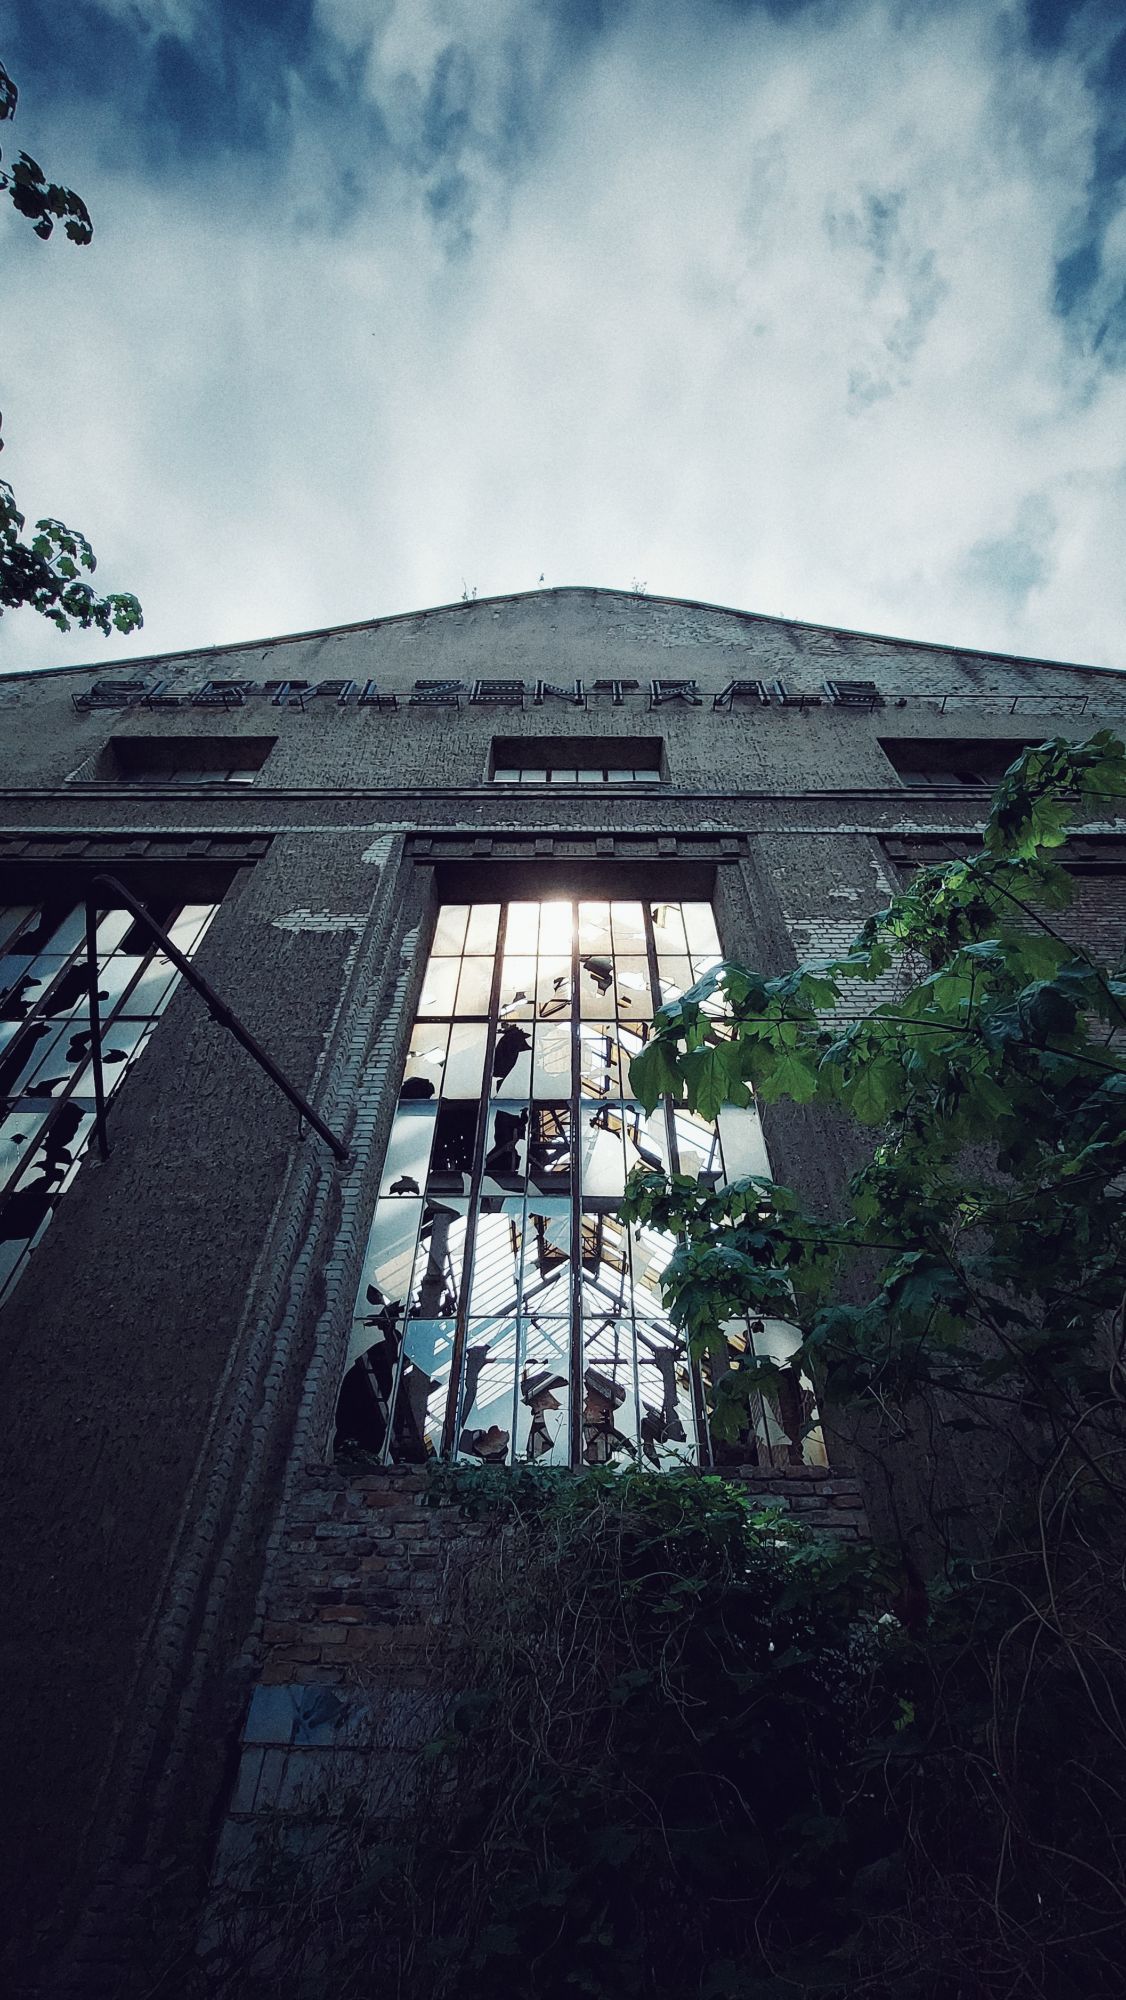 An abandoned building. Facade seen by looking up. Sun through windows, and letters reading ELBTALZENTRALE.